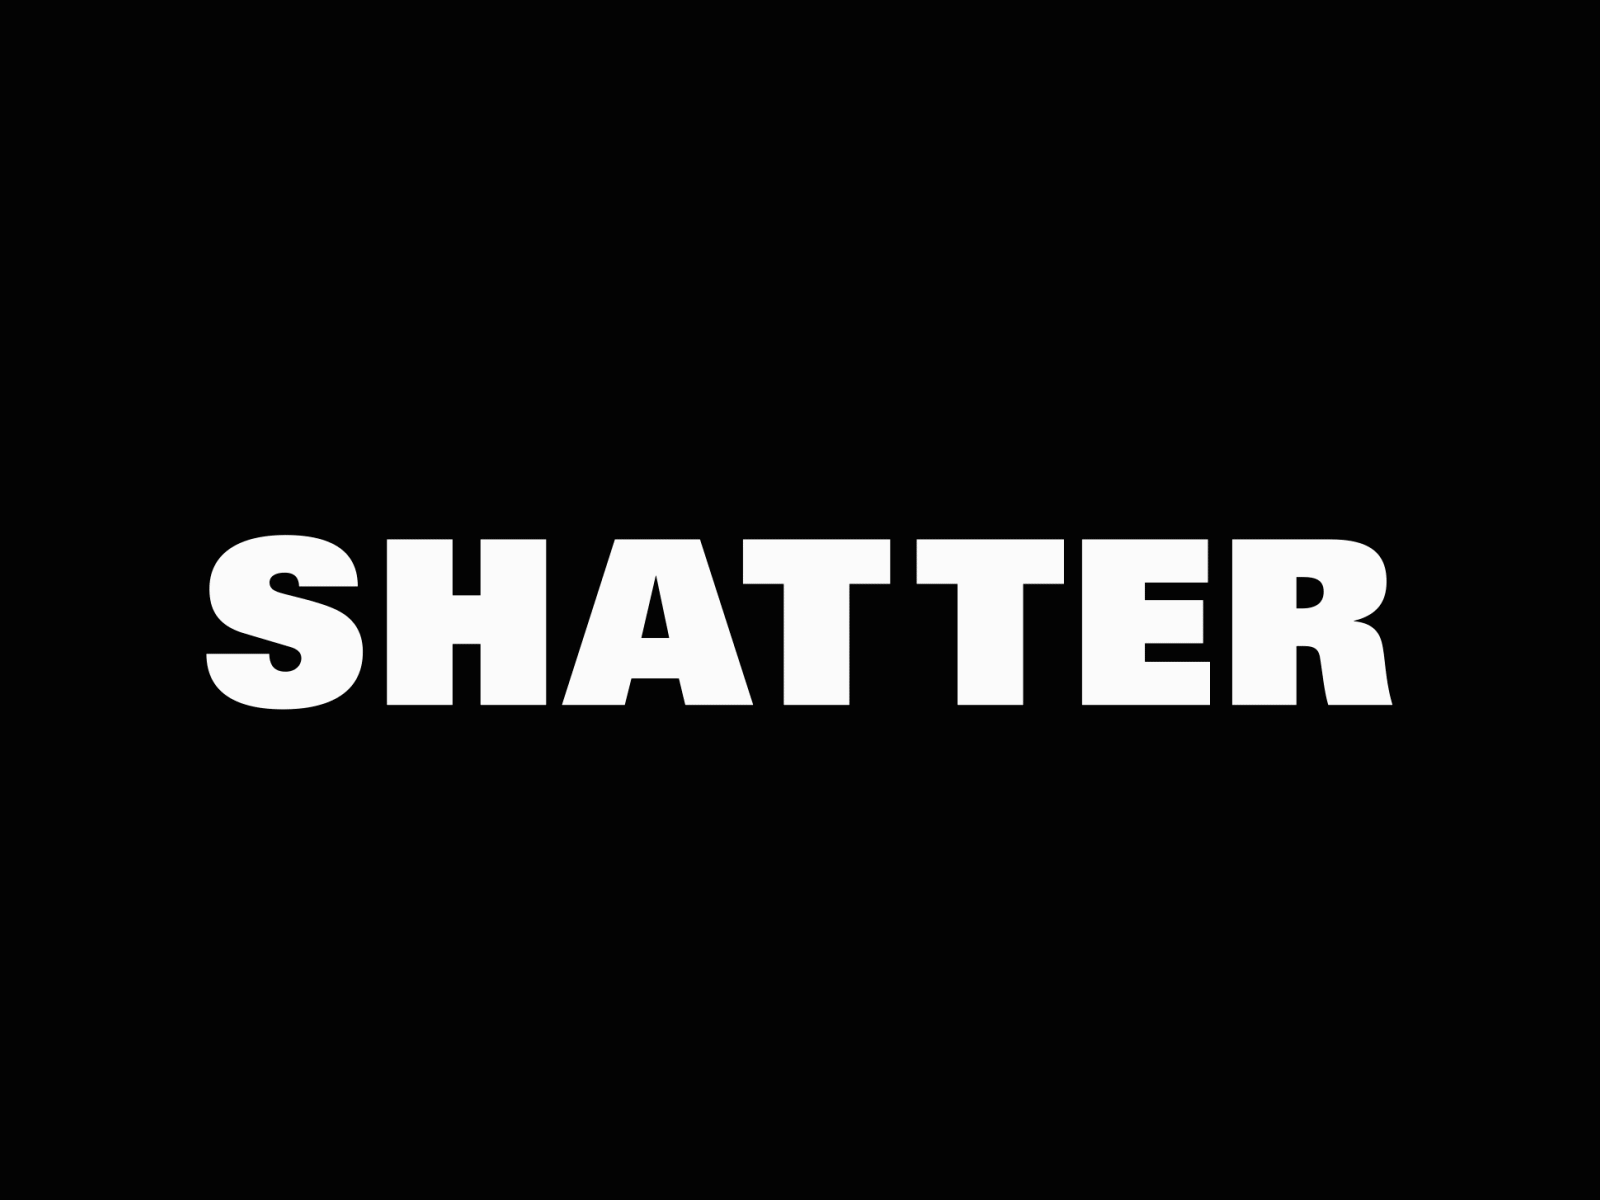 Shatter animated type animation exploding type graphicdesign kinetic type kinetic typography kinetictype kinetictypography motion design motion graphics motiongraphics shattered